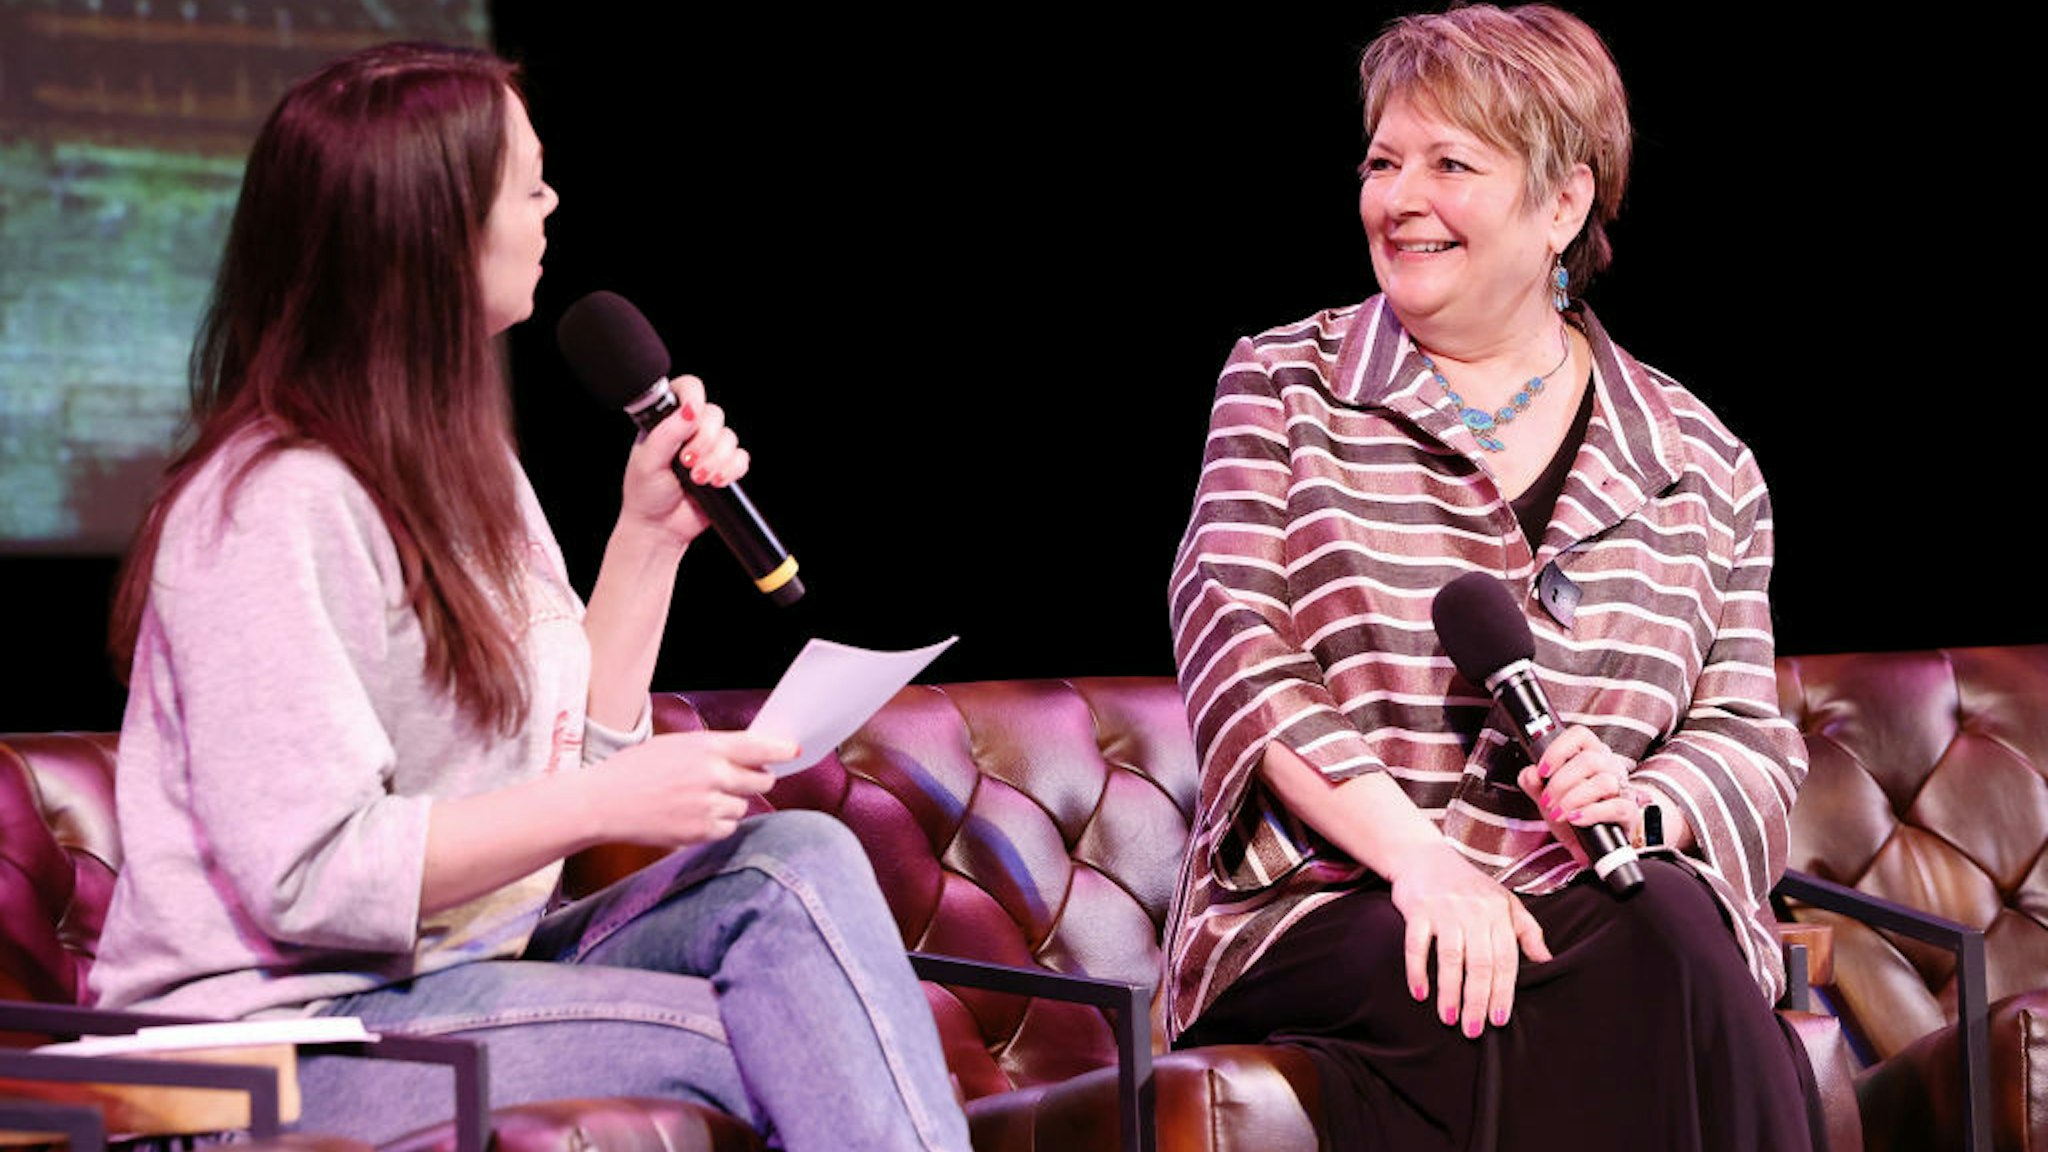 Erin Ryan and Judge Janet Protasiewicz speak onstage during the live taping of "Pod Save America," hosted by WisDems at the Barrymore Theater on March 18, 2023 in Madison, Wisconsin.